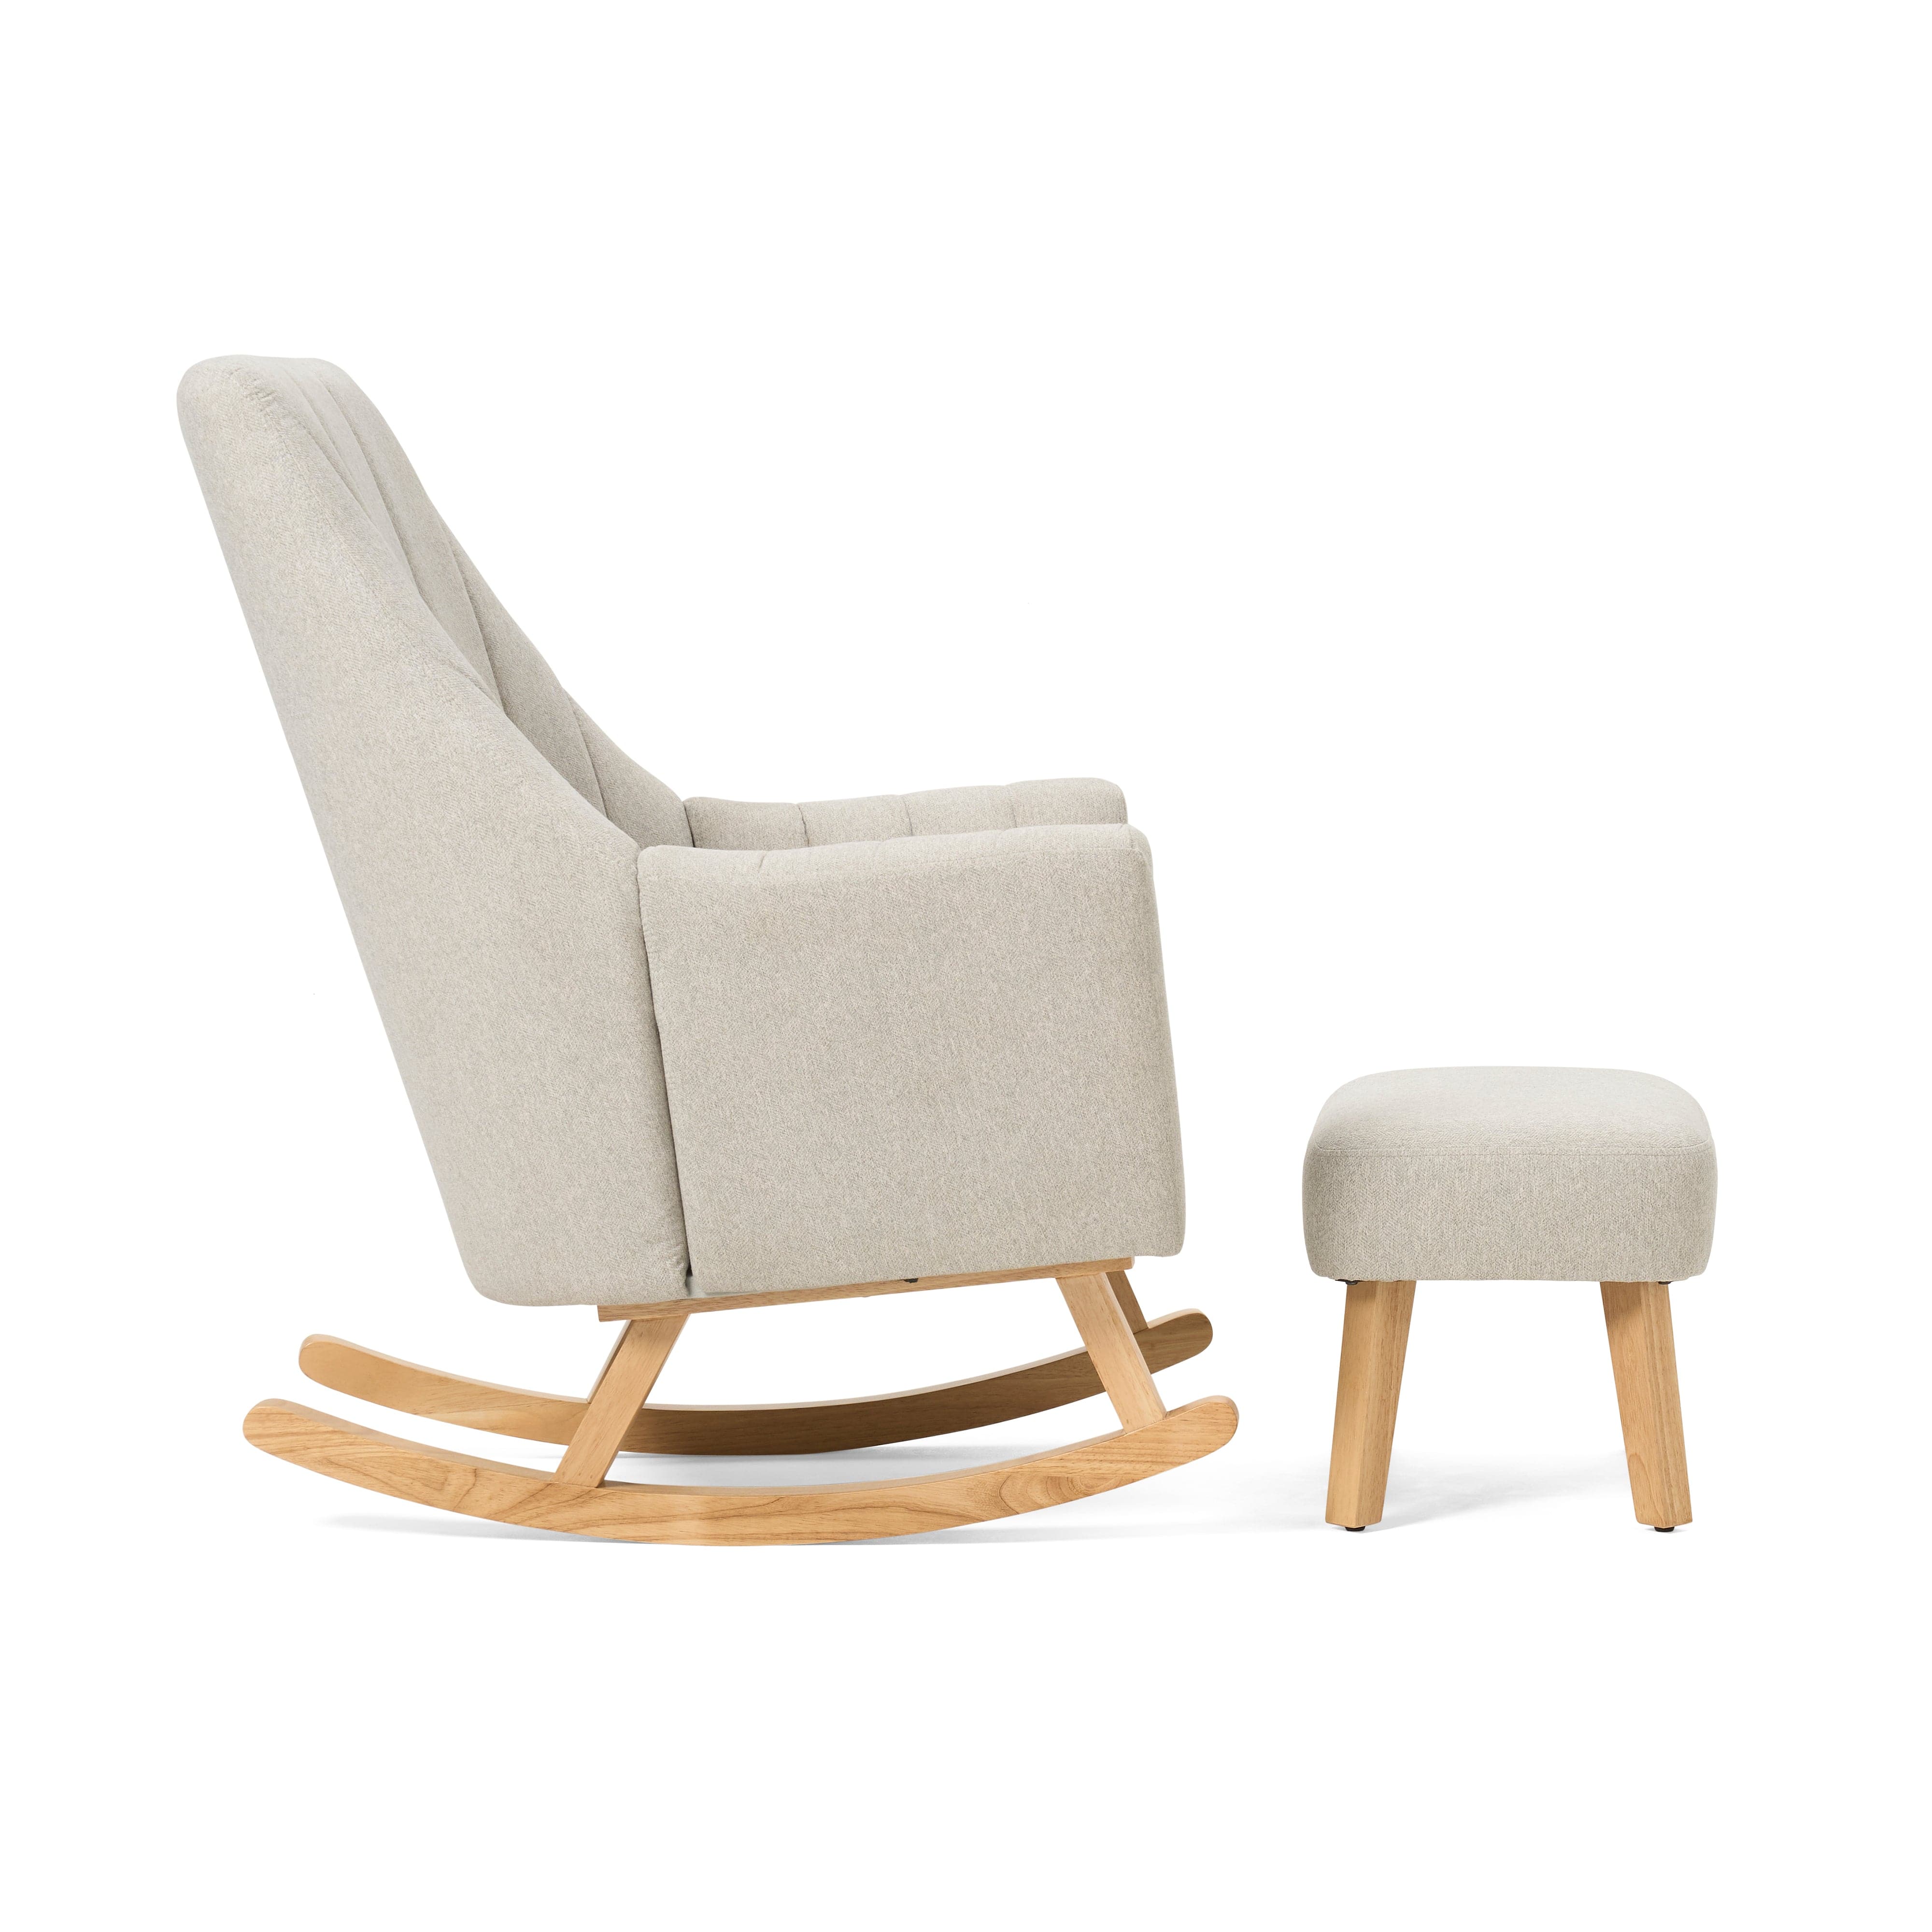 Tutti Bambini Jonah Rocking Chair & Foot Stool - Pebble - For Your Little One